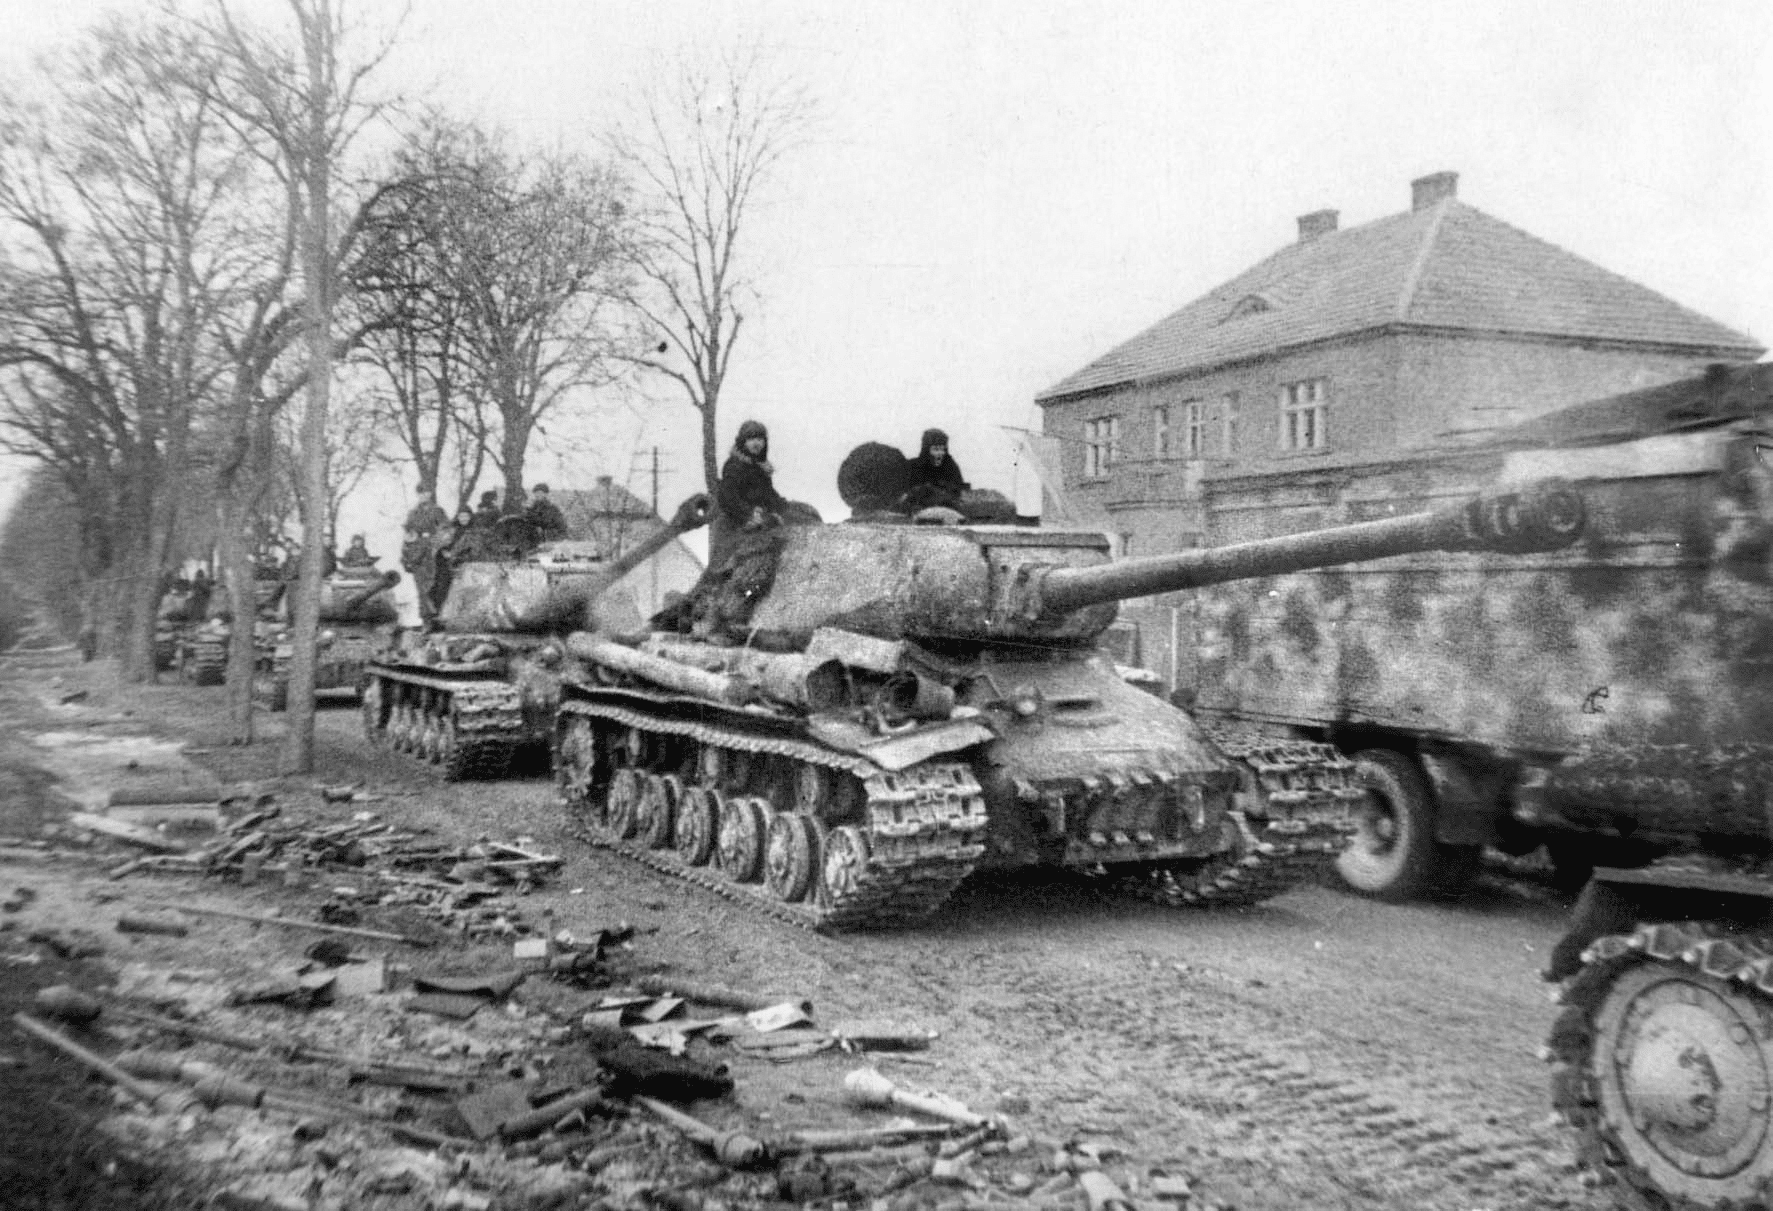 An imposing column of Soviet armor advances against the retreating Germans. The Germans occasionally succeeded in ambushing enemy tank formations.